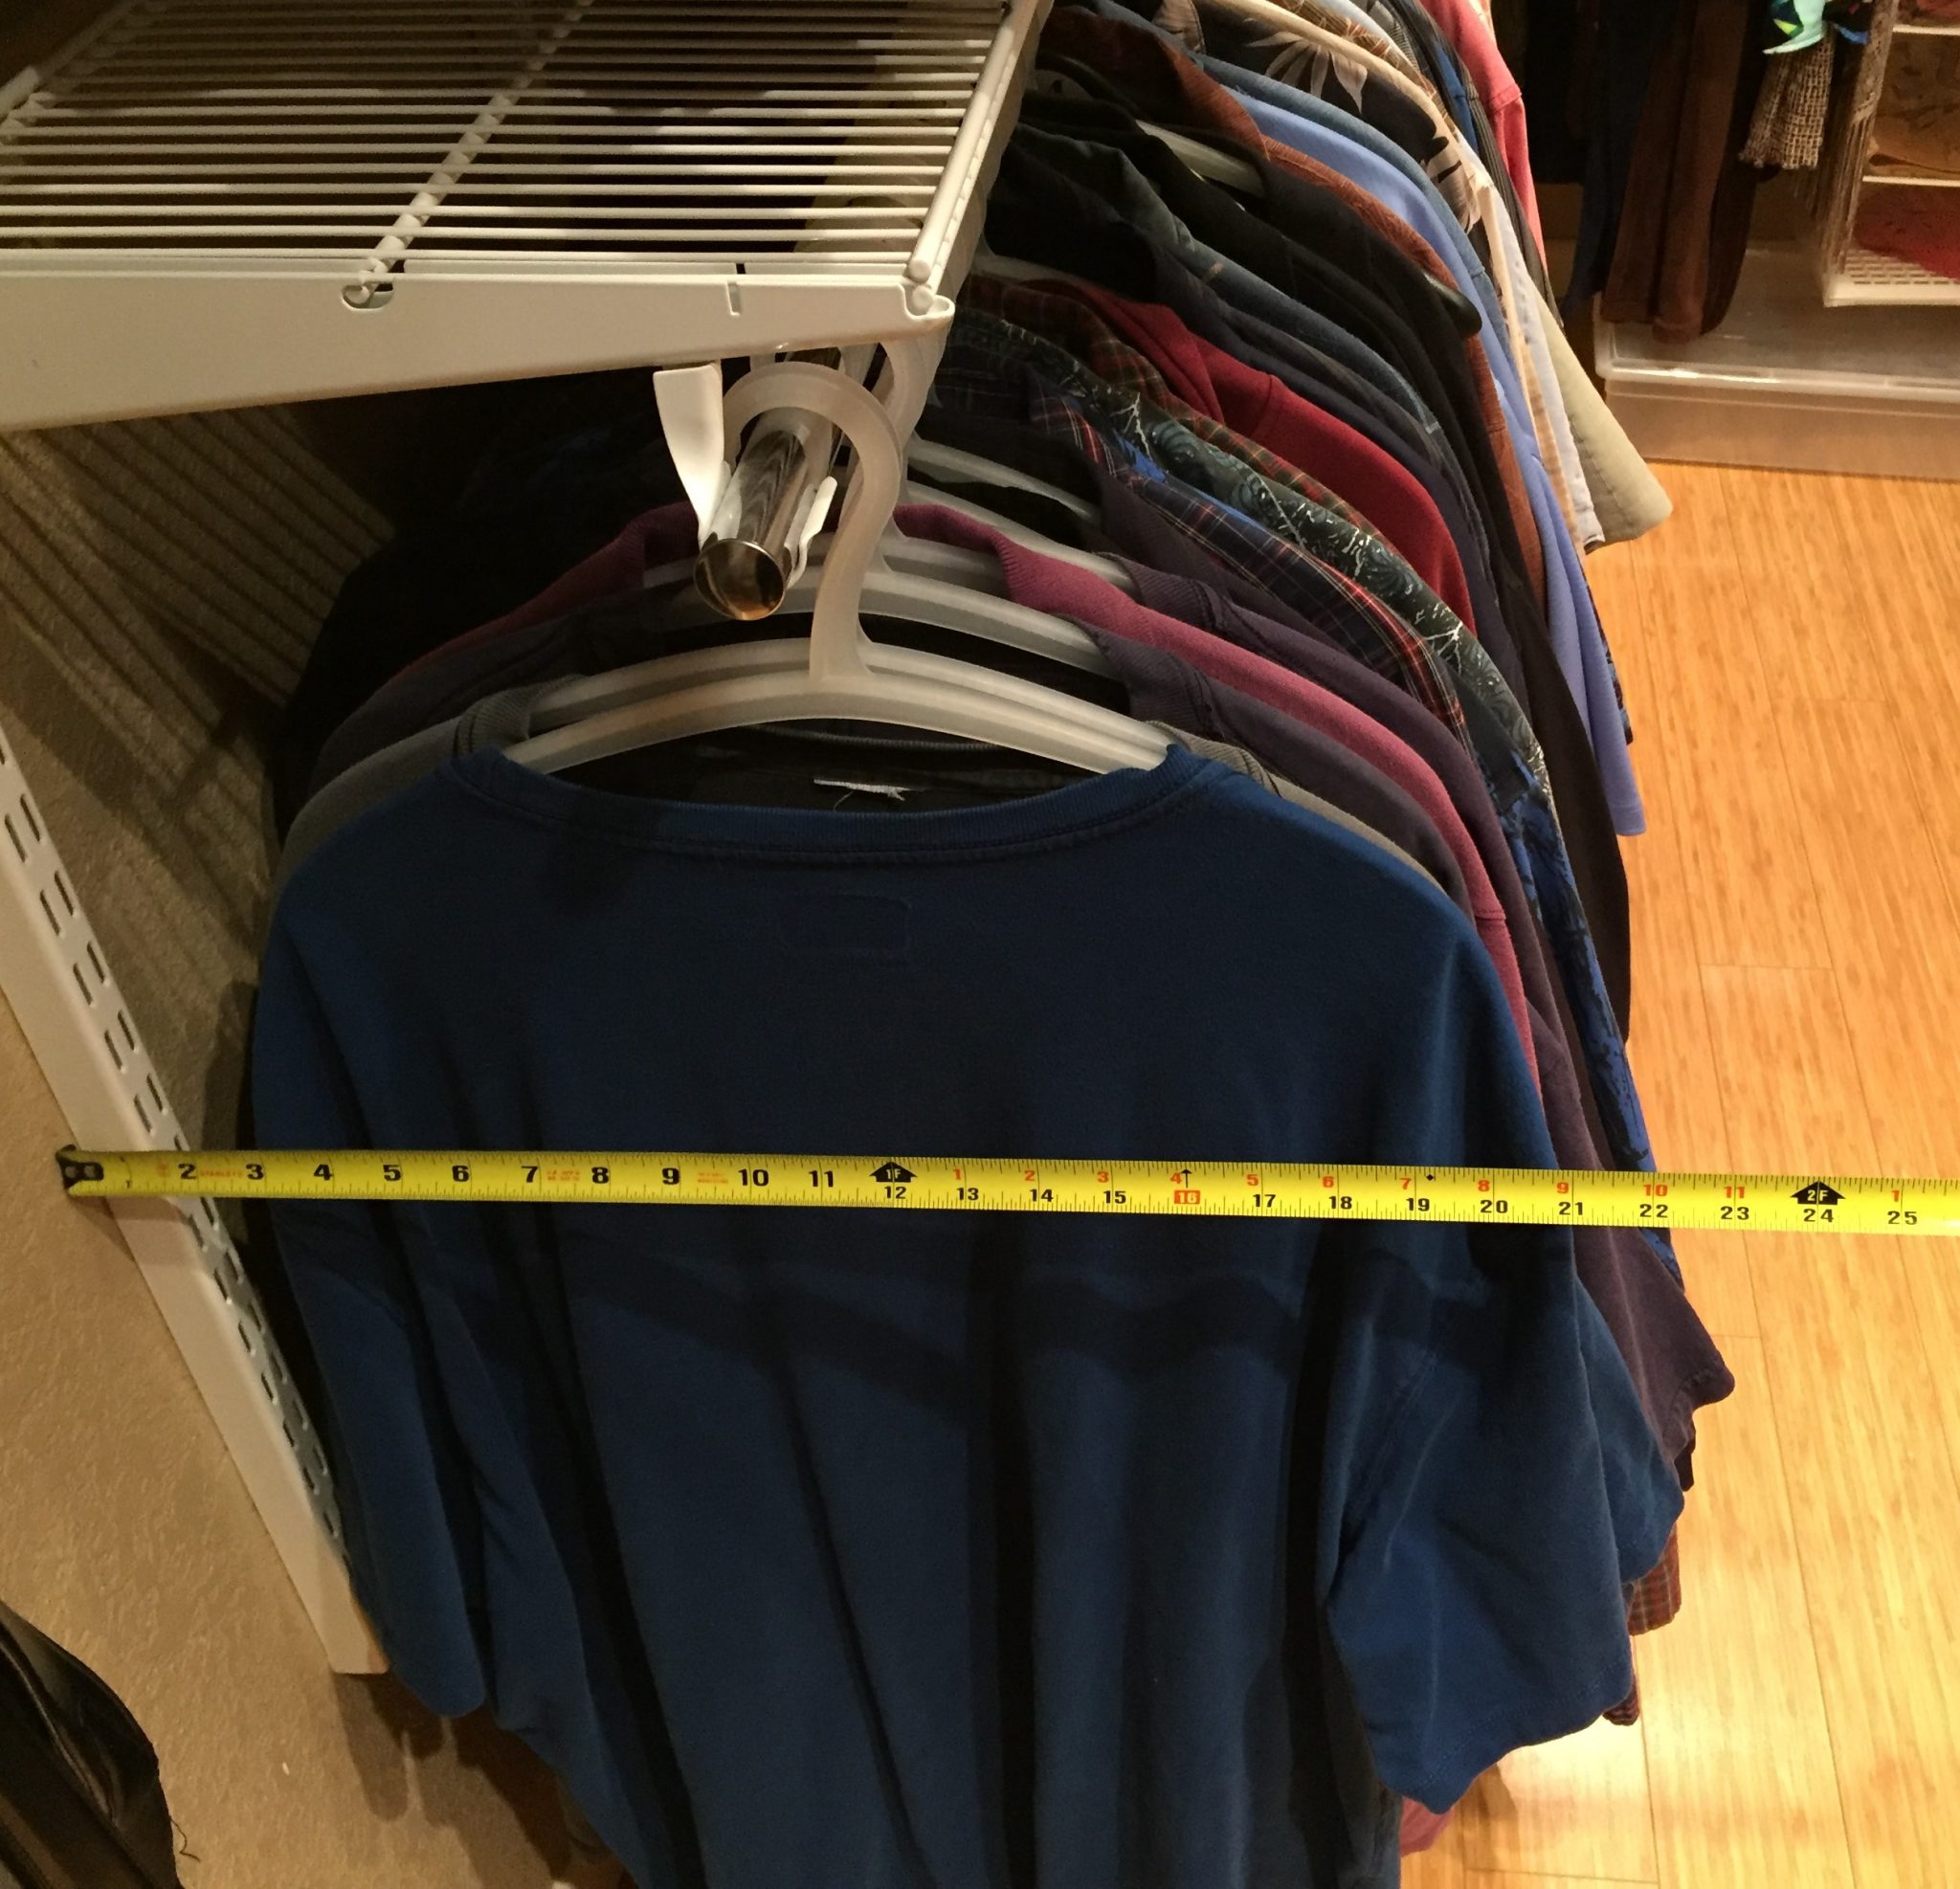 Hang Up Clothes In Closet